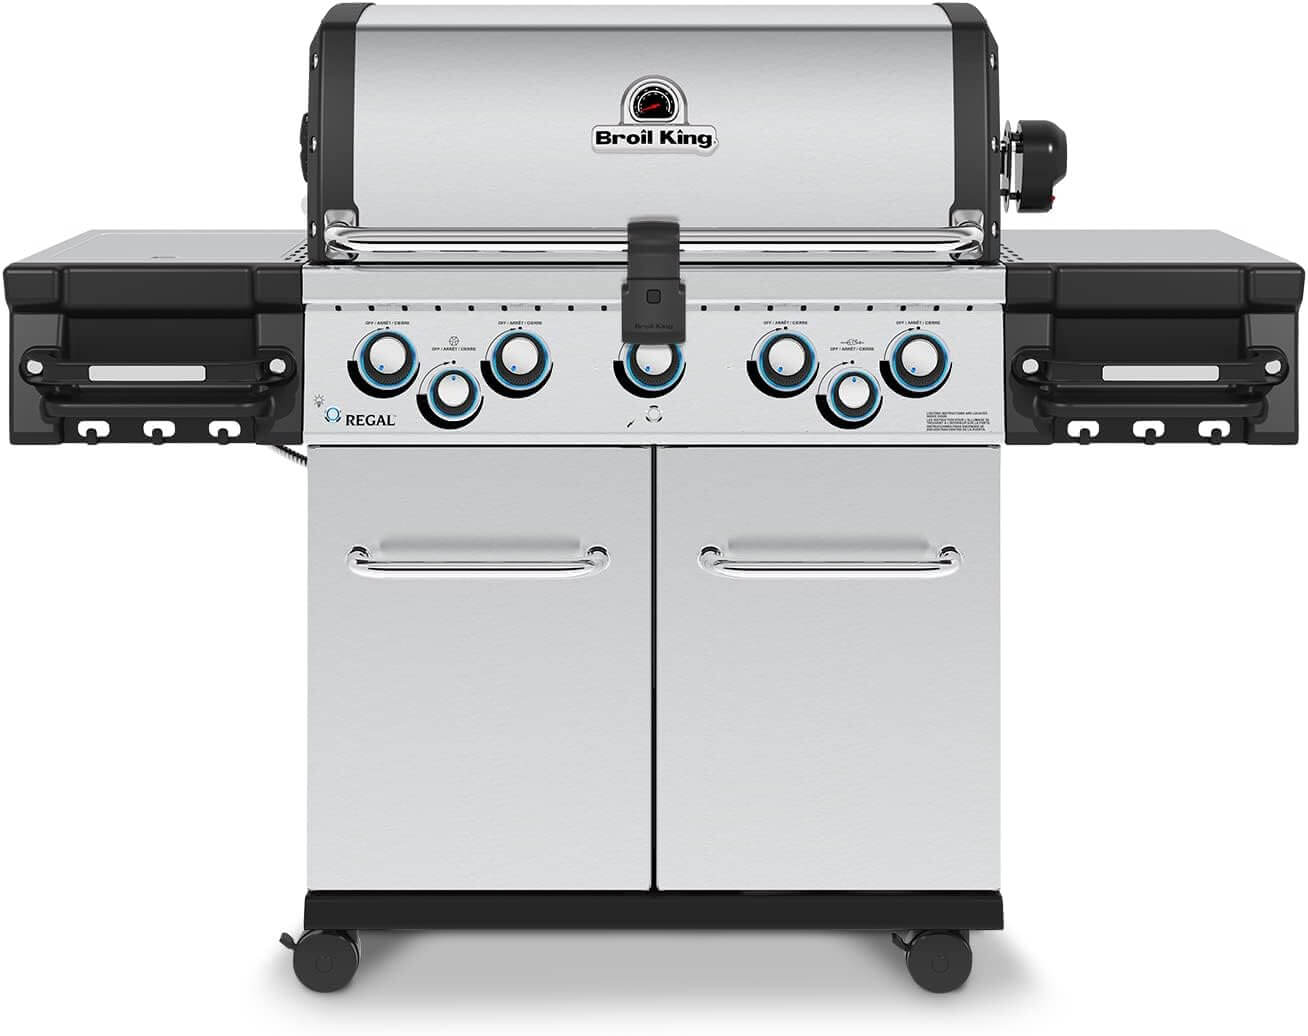 Broil King 958344 Regal S590 Pro Gas Grill